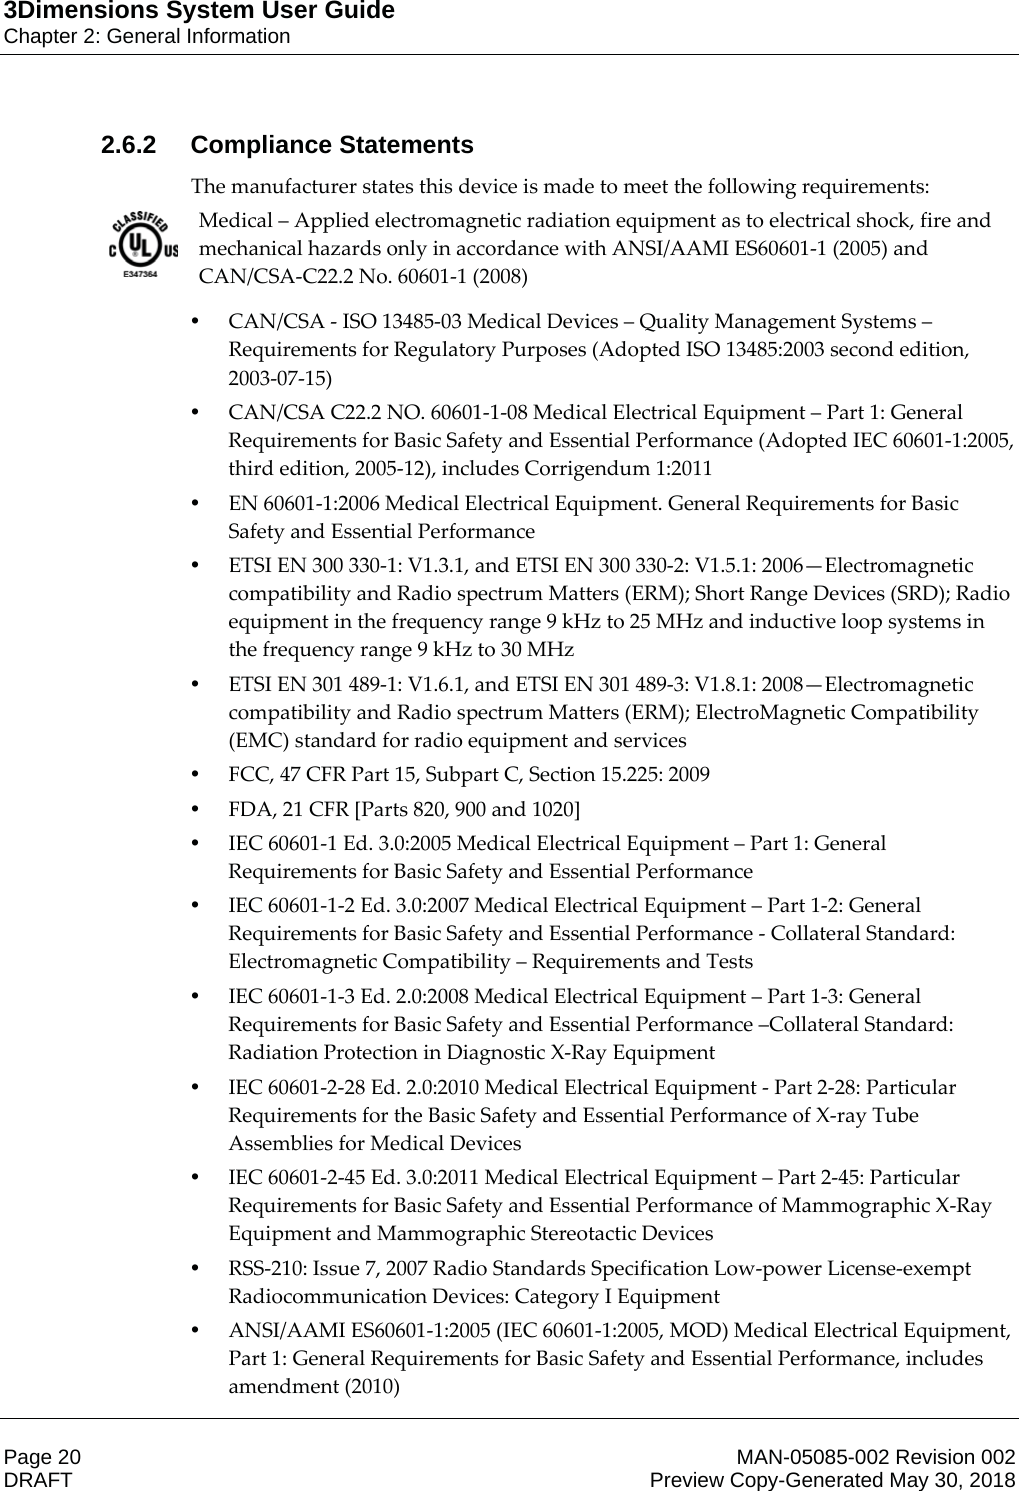 3Dimensions System User GuideChapter 2: General InformationPage 20 MAN-05085-002 Revision 002  DRAFT Preview Copy-Generated May 30, 20182.6.2 Compliance StatementsThe manufacturer states this device is made to meet the following requirements: Medical – Applied electromagnetic radiation equipment as to electrical shock, fire and mechanical hazards only in accordance with ANSI/AAMI ES60601-1 (2005) and CAN/CSA-C22.2 No. 60601-1 (2008)    •CAN/CSA - ISO 13485-03 Medical Devices – Quality Management Systems – Requirements for Regulatory Purposes (Adopted ISO 13485:2003 second edition, 2003-07-15) •CAN/CSA C22.2 NO. 60601-1-08 Medical Electrical Equipment – Part 1: General Requirements for Basic Safety and Essential Performance (Adopted IEC 60601-1:2005, third edition, 2005-12), includes Corrigendum 1:2011 •EN 60601-1:2006 Medical Electrical Equipment. General Requirements for Basic Safety and Essential Performance •ETSI EN 300 330-1: V1.3.1, and ETSI EN 300 330-2: V1.5.1: 2006—Electromagnetic compatibility and Radio spectrum Matters (ERM); Short Range Devices (SRD); Radio equipment in the frequency range 9 kHz to 25 MHz and inductive loop systems in the frequency range 9 kHz to 30 MHz •ETSI EN 301 489-1: V1.6.1, and ETSI EN 301 489-3: V1.8.1: 2008—Electromagnetic compatibility and Radio spectrum Matters (ERM); ElectroMagnetic Compatibility (EMC) standard for radio equipment and services •FCC, 47 CFR Part 15, Subpart C, Section 15.225: 2009 •FDA, 21 CFR [Parts 820, 900 and 1020] •IEC 60601-1 Ed. 3.0:2005 Medical Electrical Equipment – Part 1: General Requirements for Basic Safety and Essential Performance •IEC 60601-1-2 Ed. 3.0:2007 Medical Electrical Equipment – Part 1-2: General Requirements for Basic Safety and Essential Performance - Collateral Standard: Electromagnetic Compatibility – Requirements and Tests •IEC 60601-1-3 Ed. 2.0:2008 Medical Electrical Equipment – Part 1-3: General Requirements for Basic Safety and Essential Performance –Collateral Standard: Radiation Protection in Diagnostic X-Ray Equipment •IEC 60601-2-28 Ed. 2.0:2010 Medical Electrical Equipment - Part 2-28: Particular Requirements for the Basic Safety and Essential Performance of X-ray Tube Assemblies for Medical Devices •IEC 60601-2-45 Ed. 3.0:2011 Medical Electrical Equipment – Part 2-45: Particular Requirements for Basic Safety and Essential Performance of Mammographic X-Ray Equipment and Mammographic Stereotactic Devices •RSS-210: Issue 7, 2007 Radio Standards Specification Low-power License-exempt Radiocommunication Devices: Category I Equipment •ANSI/AAMI ES60601-1:2005 (IEC 60601-1:2005, MOD) Medical Electrical Equipment, Part 1: General Requirements for Basic Safety and Essential Performance, includes amendment (2010) 